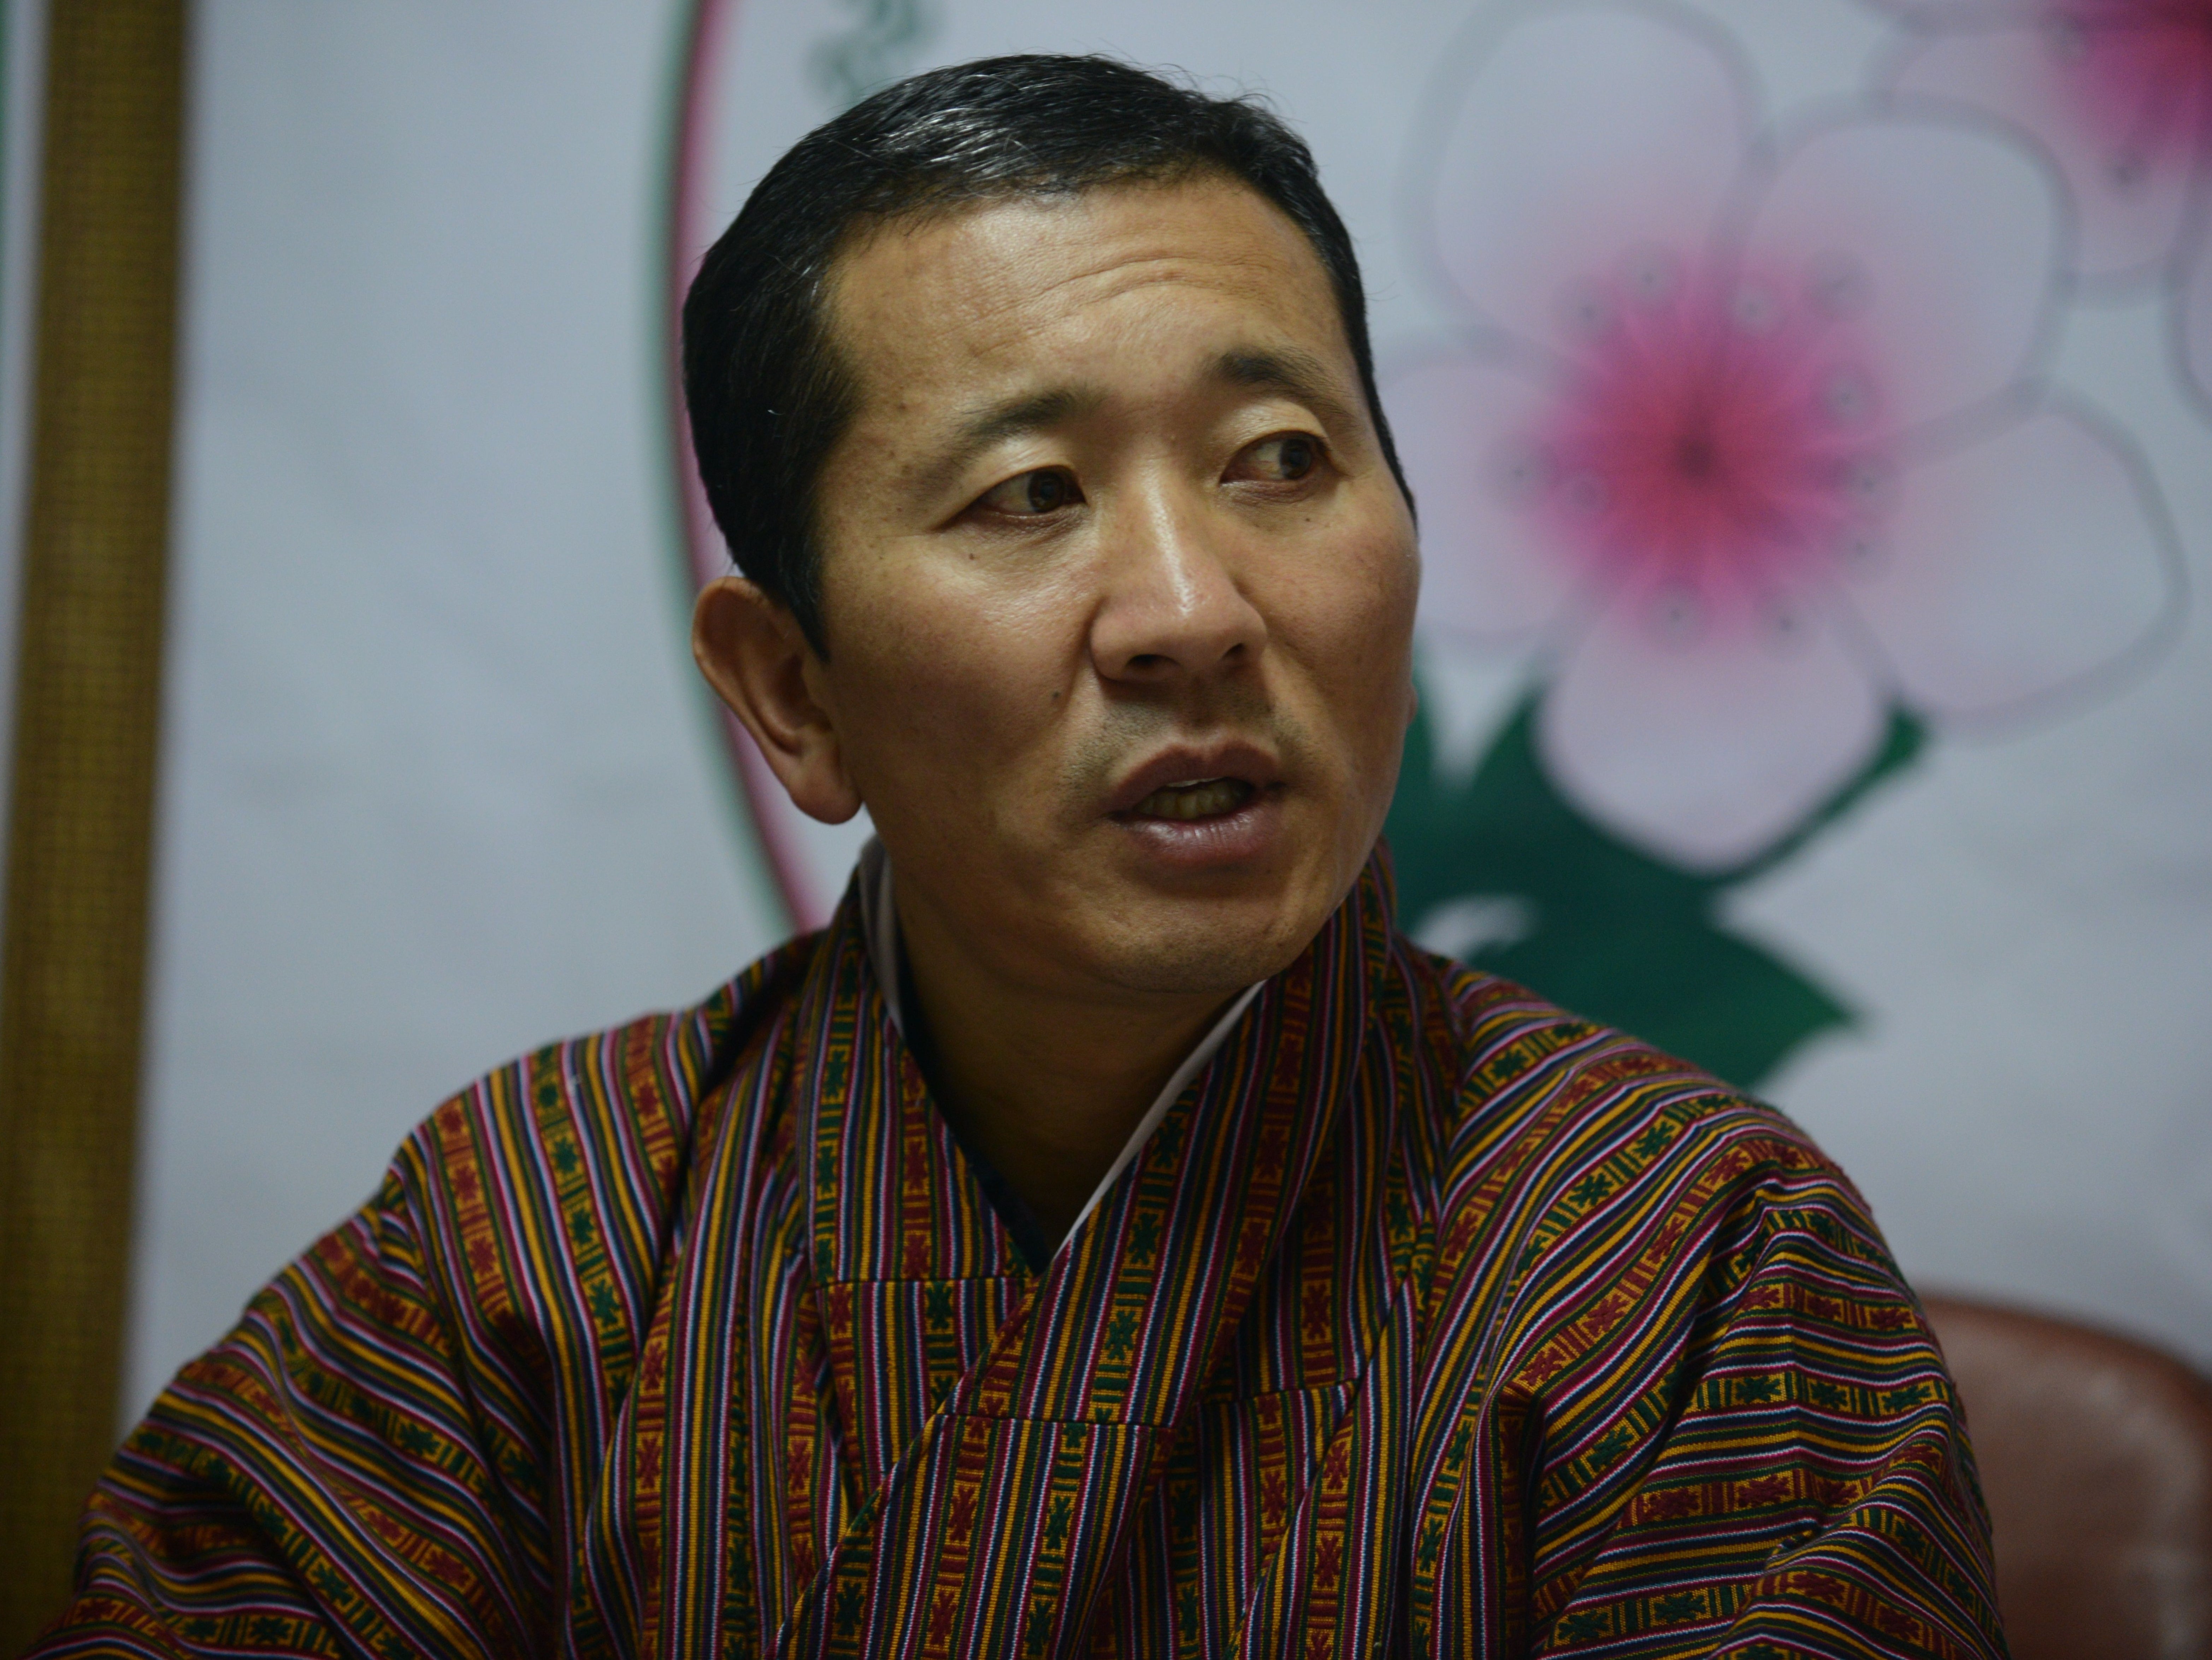 File: Bhutan PM condoled the country’s rare, fourth Covid death in an open letter shared on Facebook